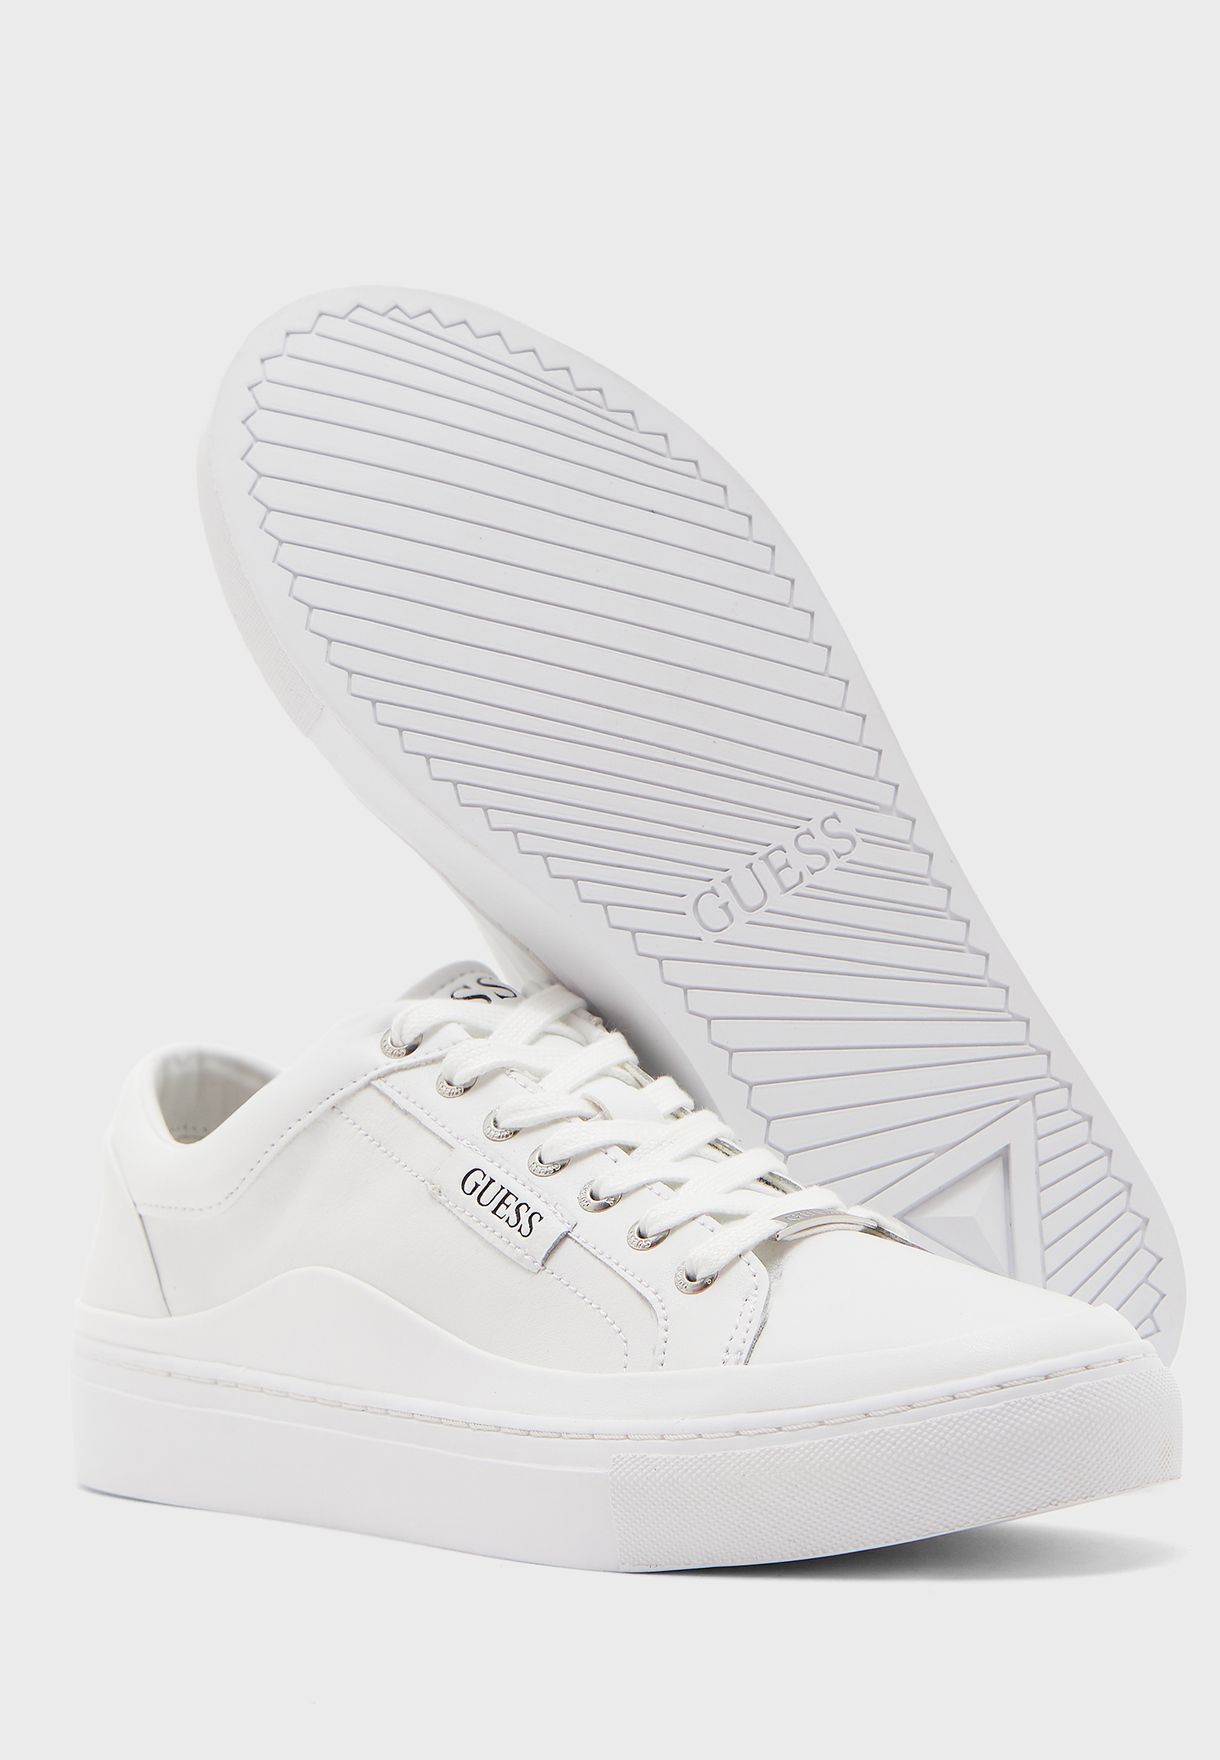 guess white shoes price